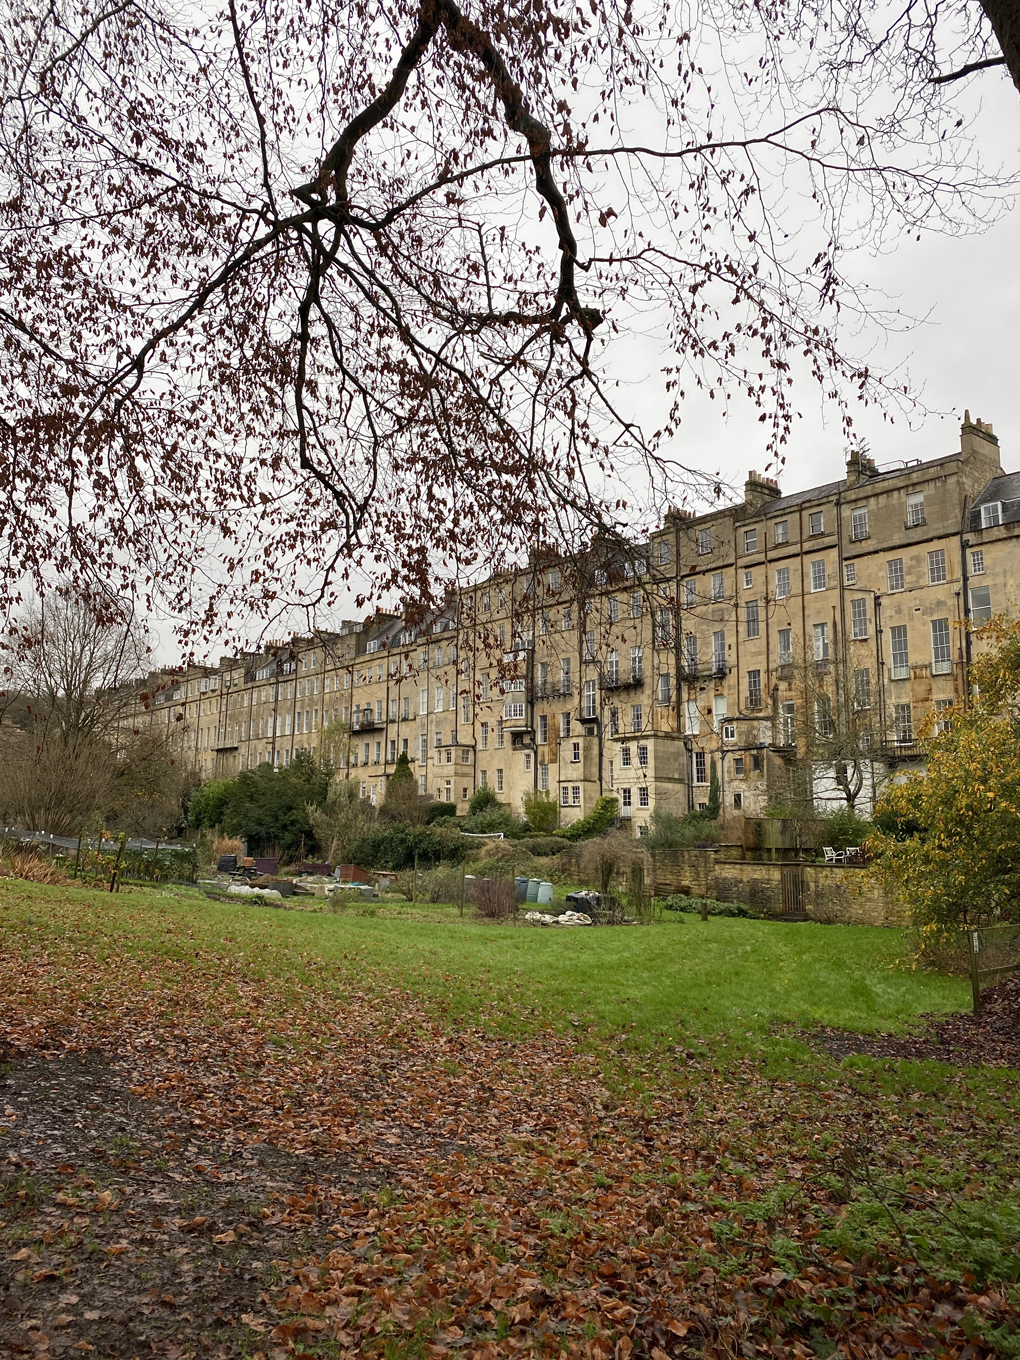 The back of a tall row of terraced houses in Bath stone, with allotments, trees and dead leaves in the foreground